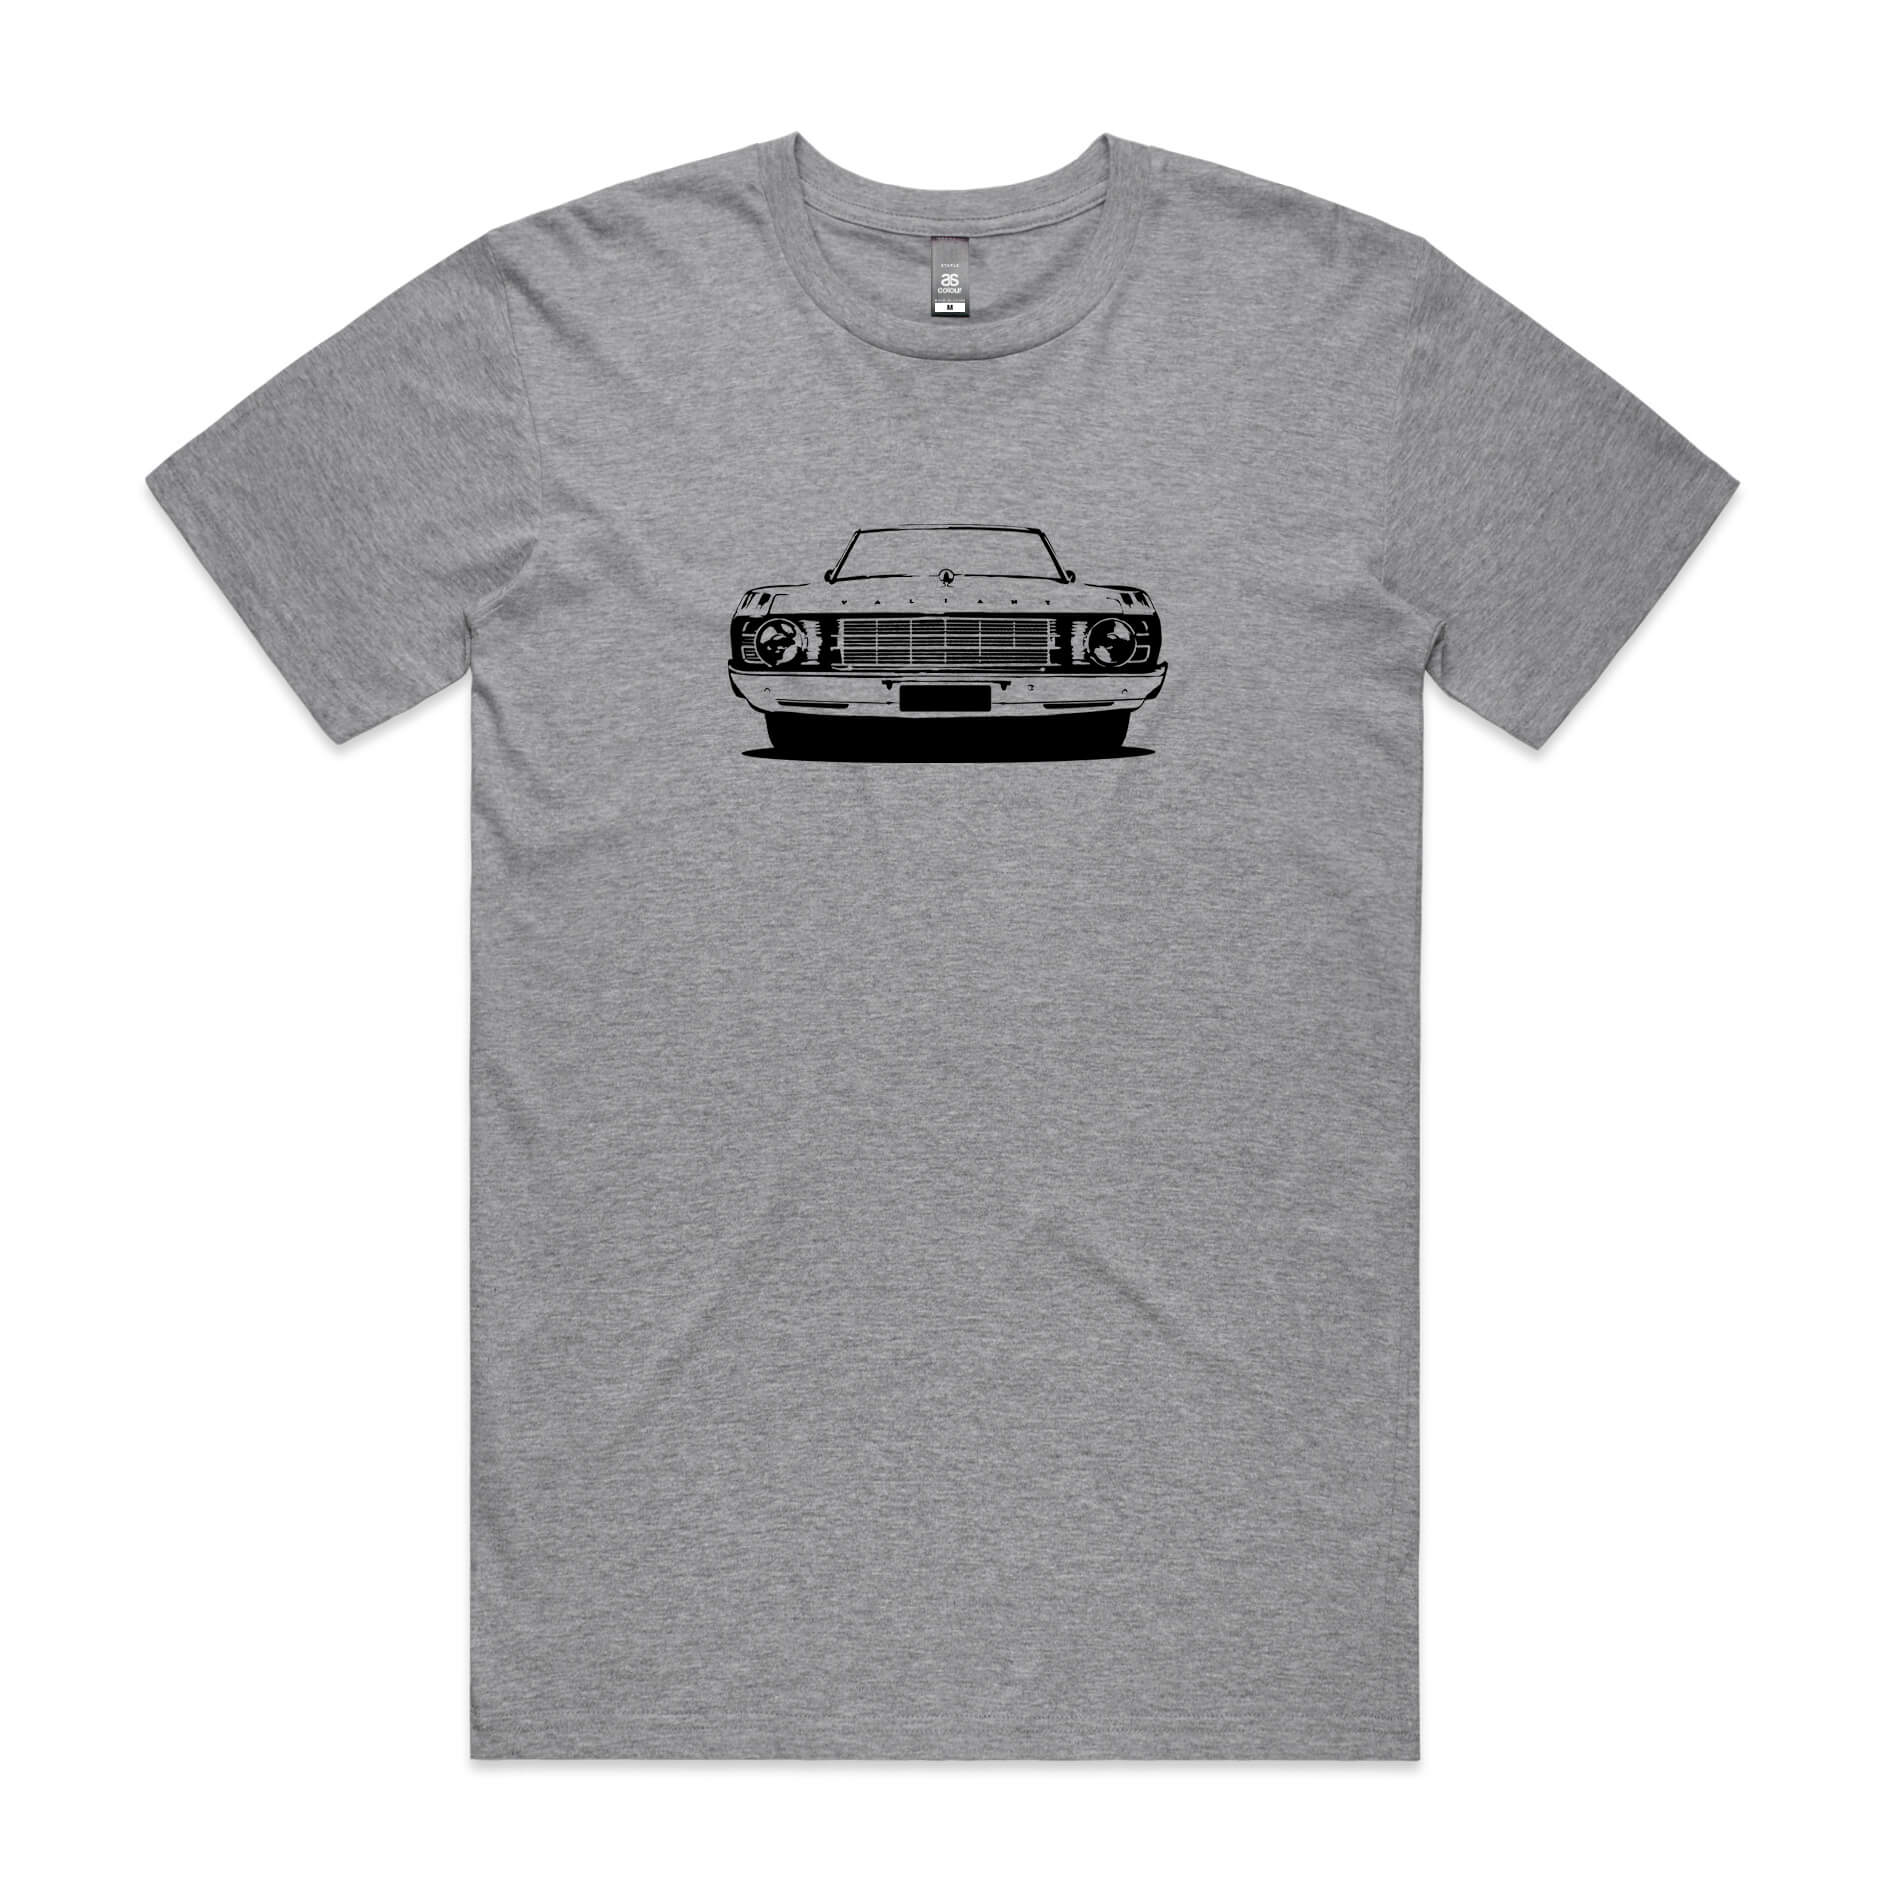 Chrysler Valiant VF t-shirt in grey with black car graphic